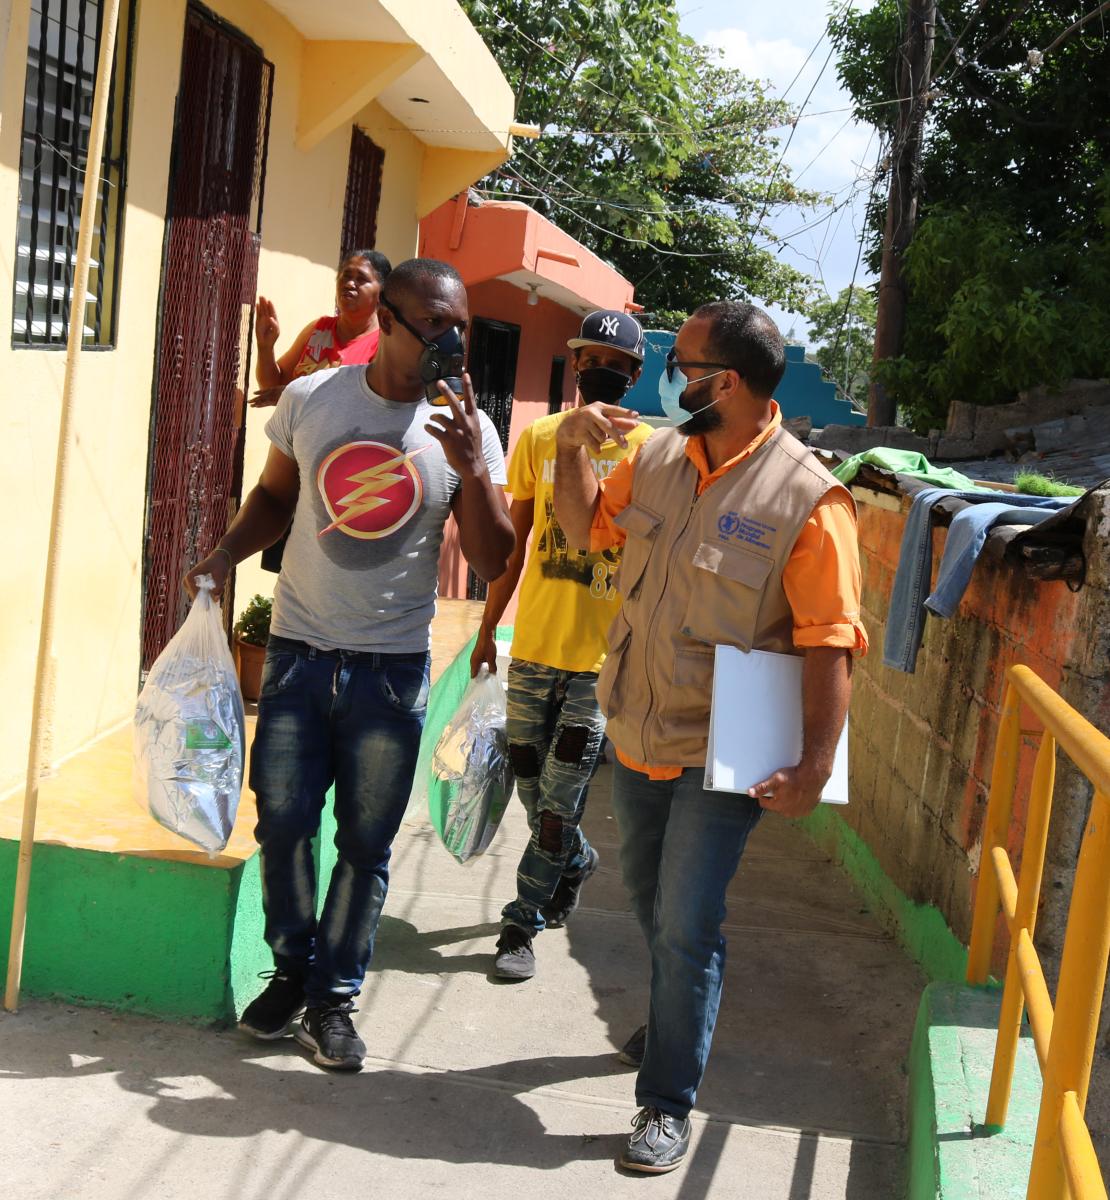 UN staff with local residents walk along homes in a neighbourhood in the Dominican Republic.